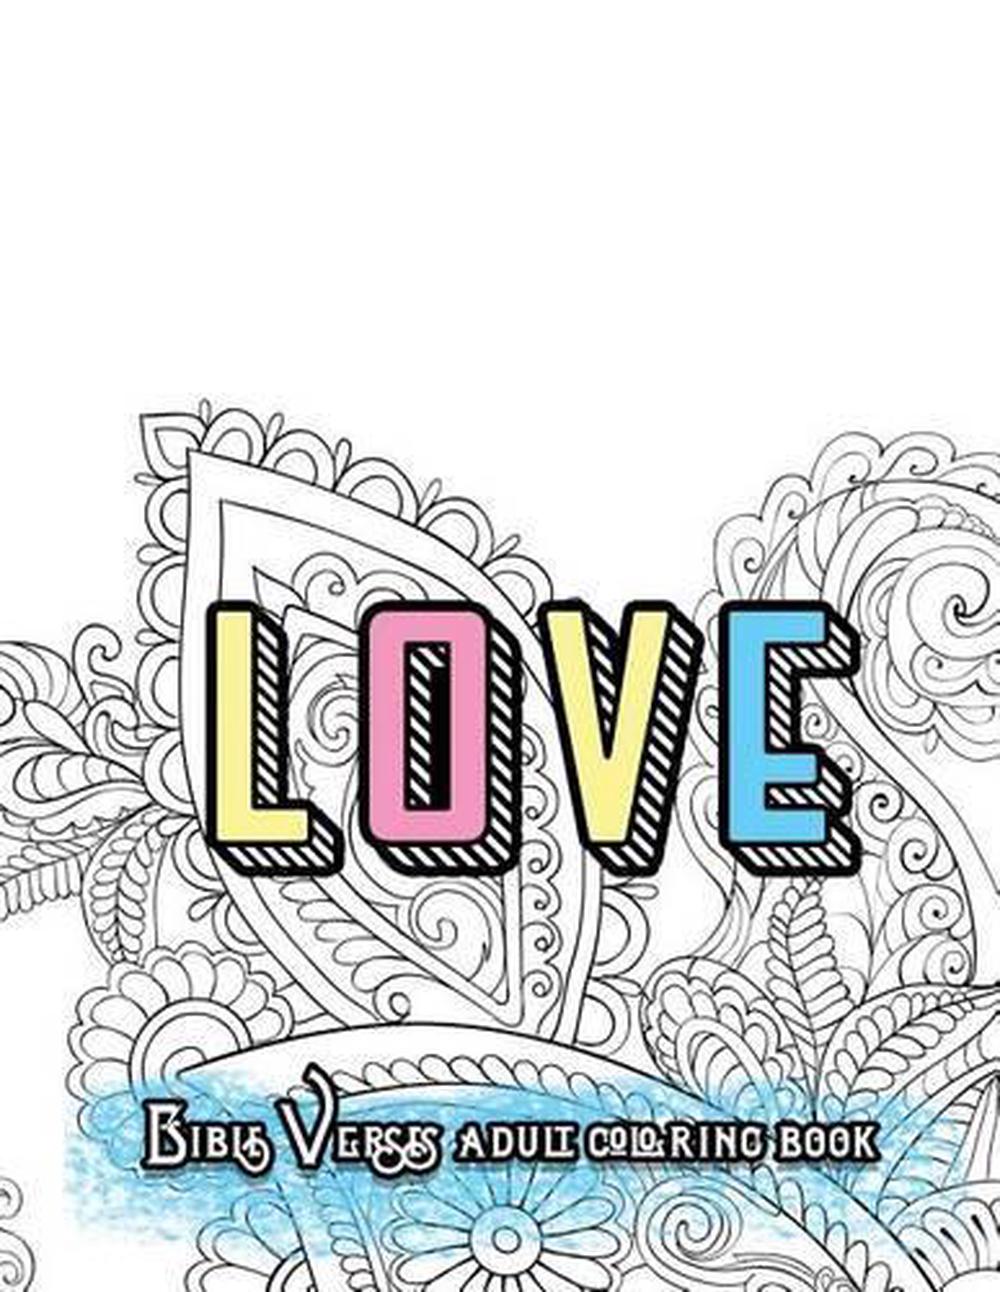 Love Bible Verses Adult Coloring Book Inspirational Quotes And Psalms Faith An Ebay